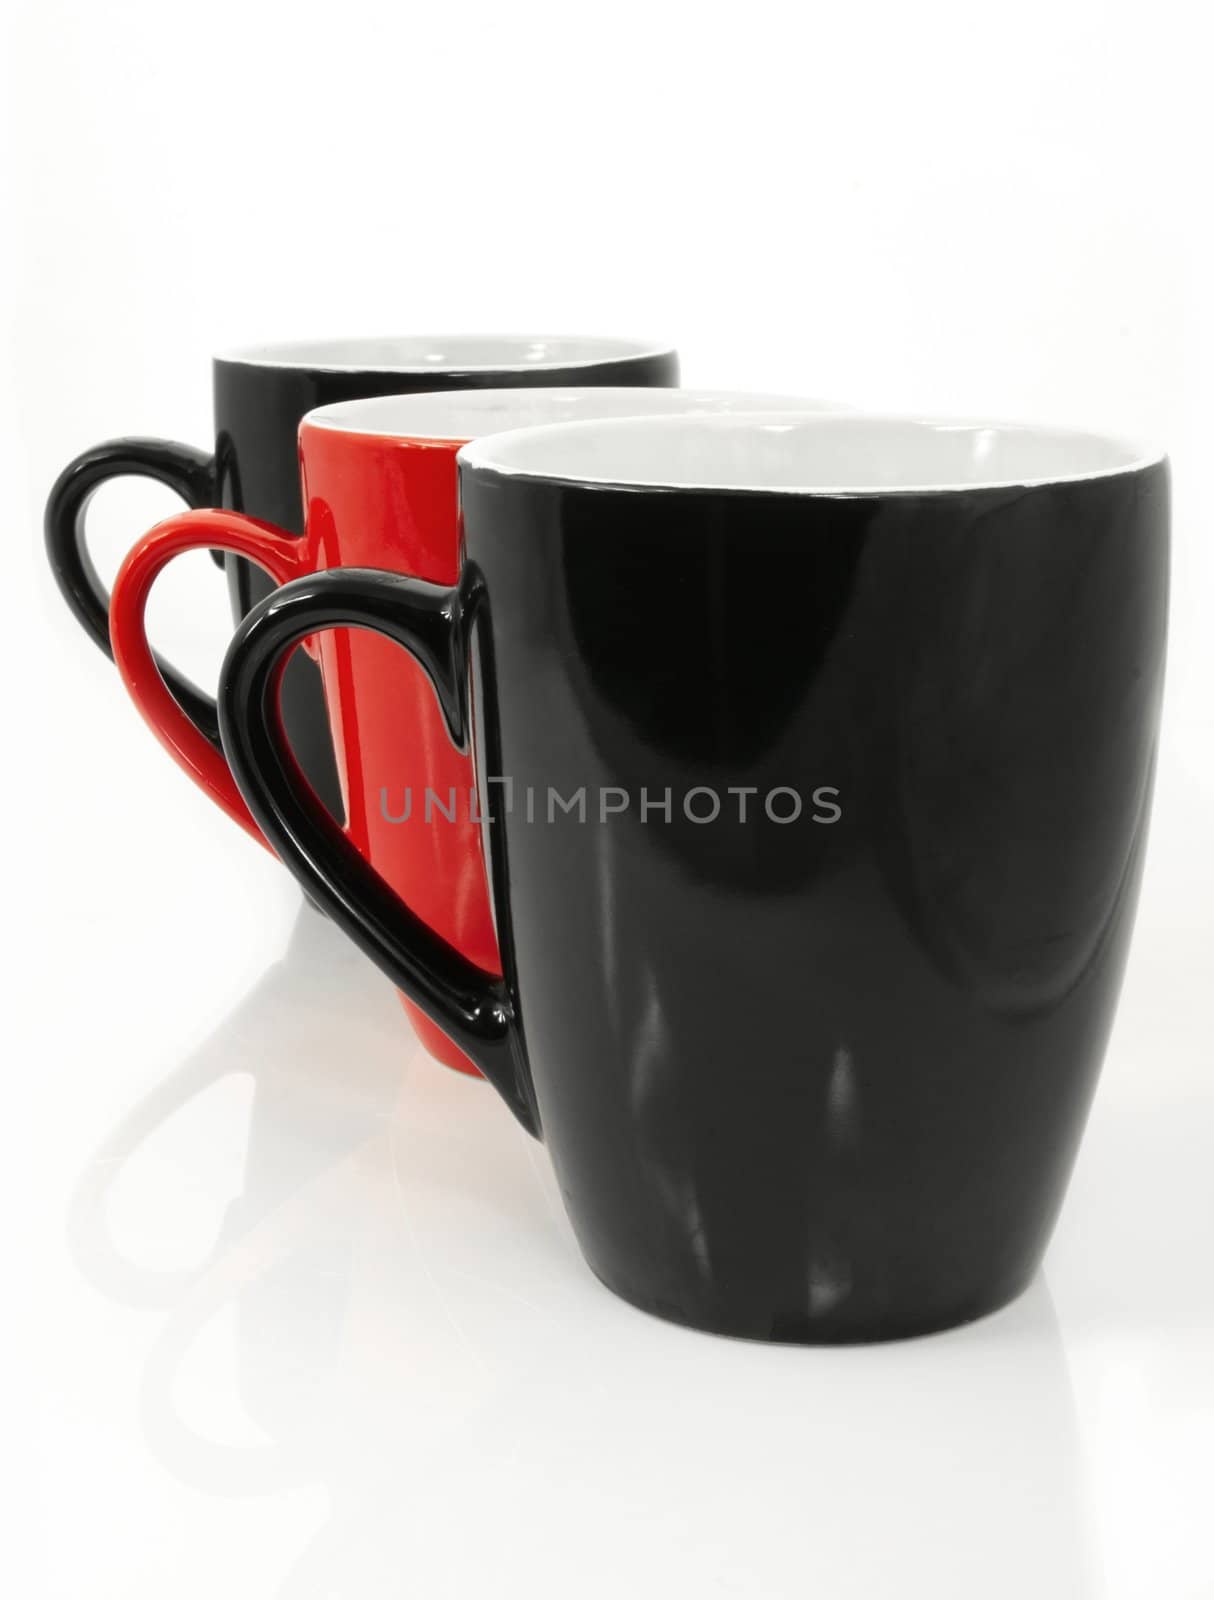 Three coffee cups. Red cup in the center